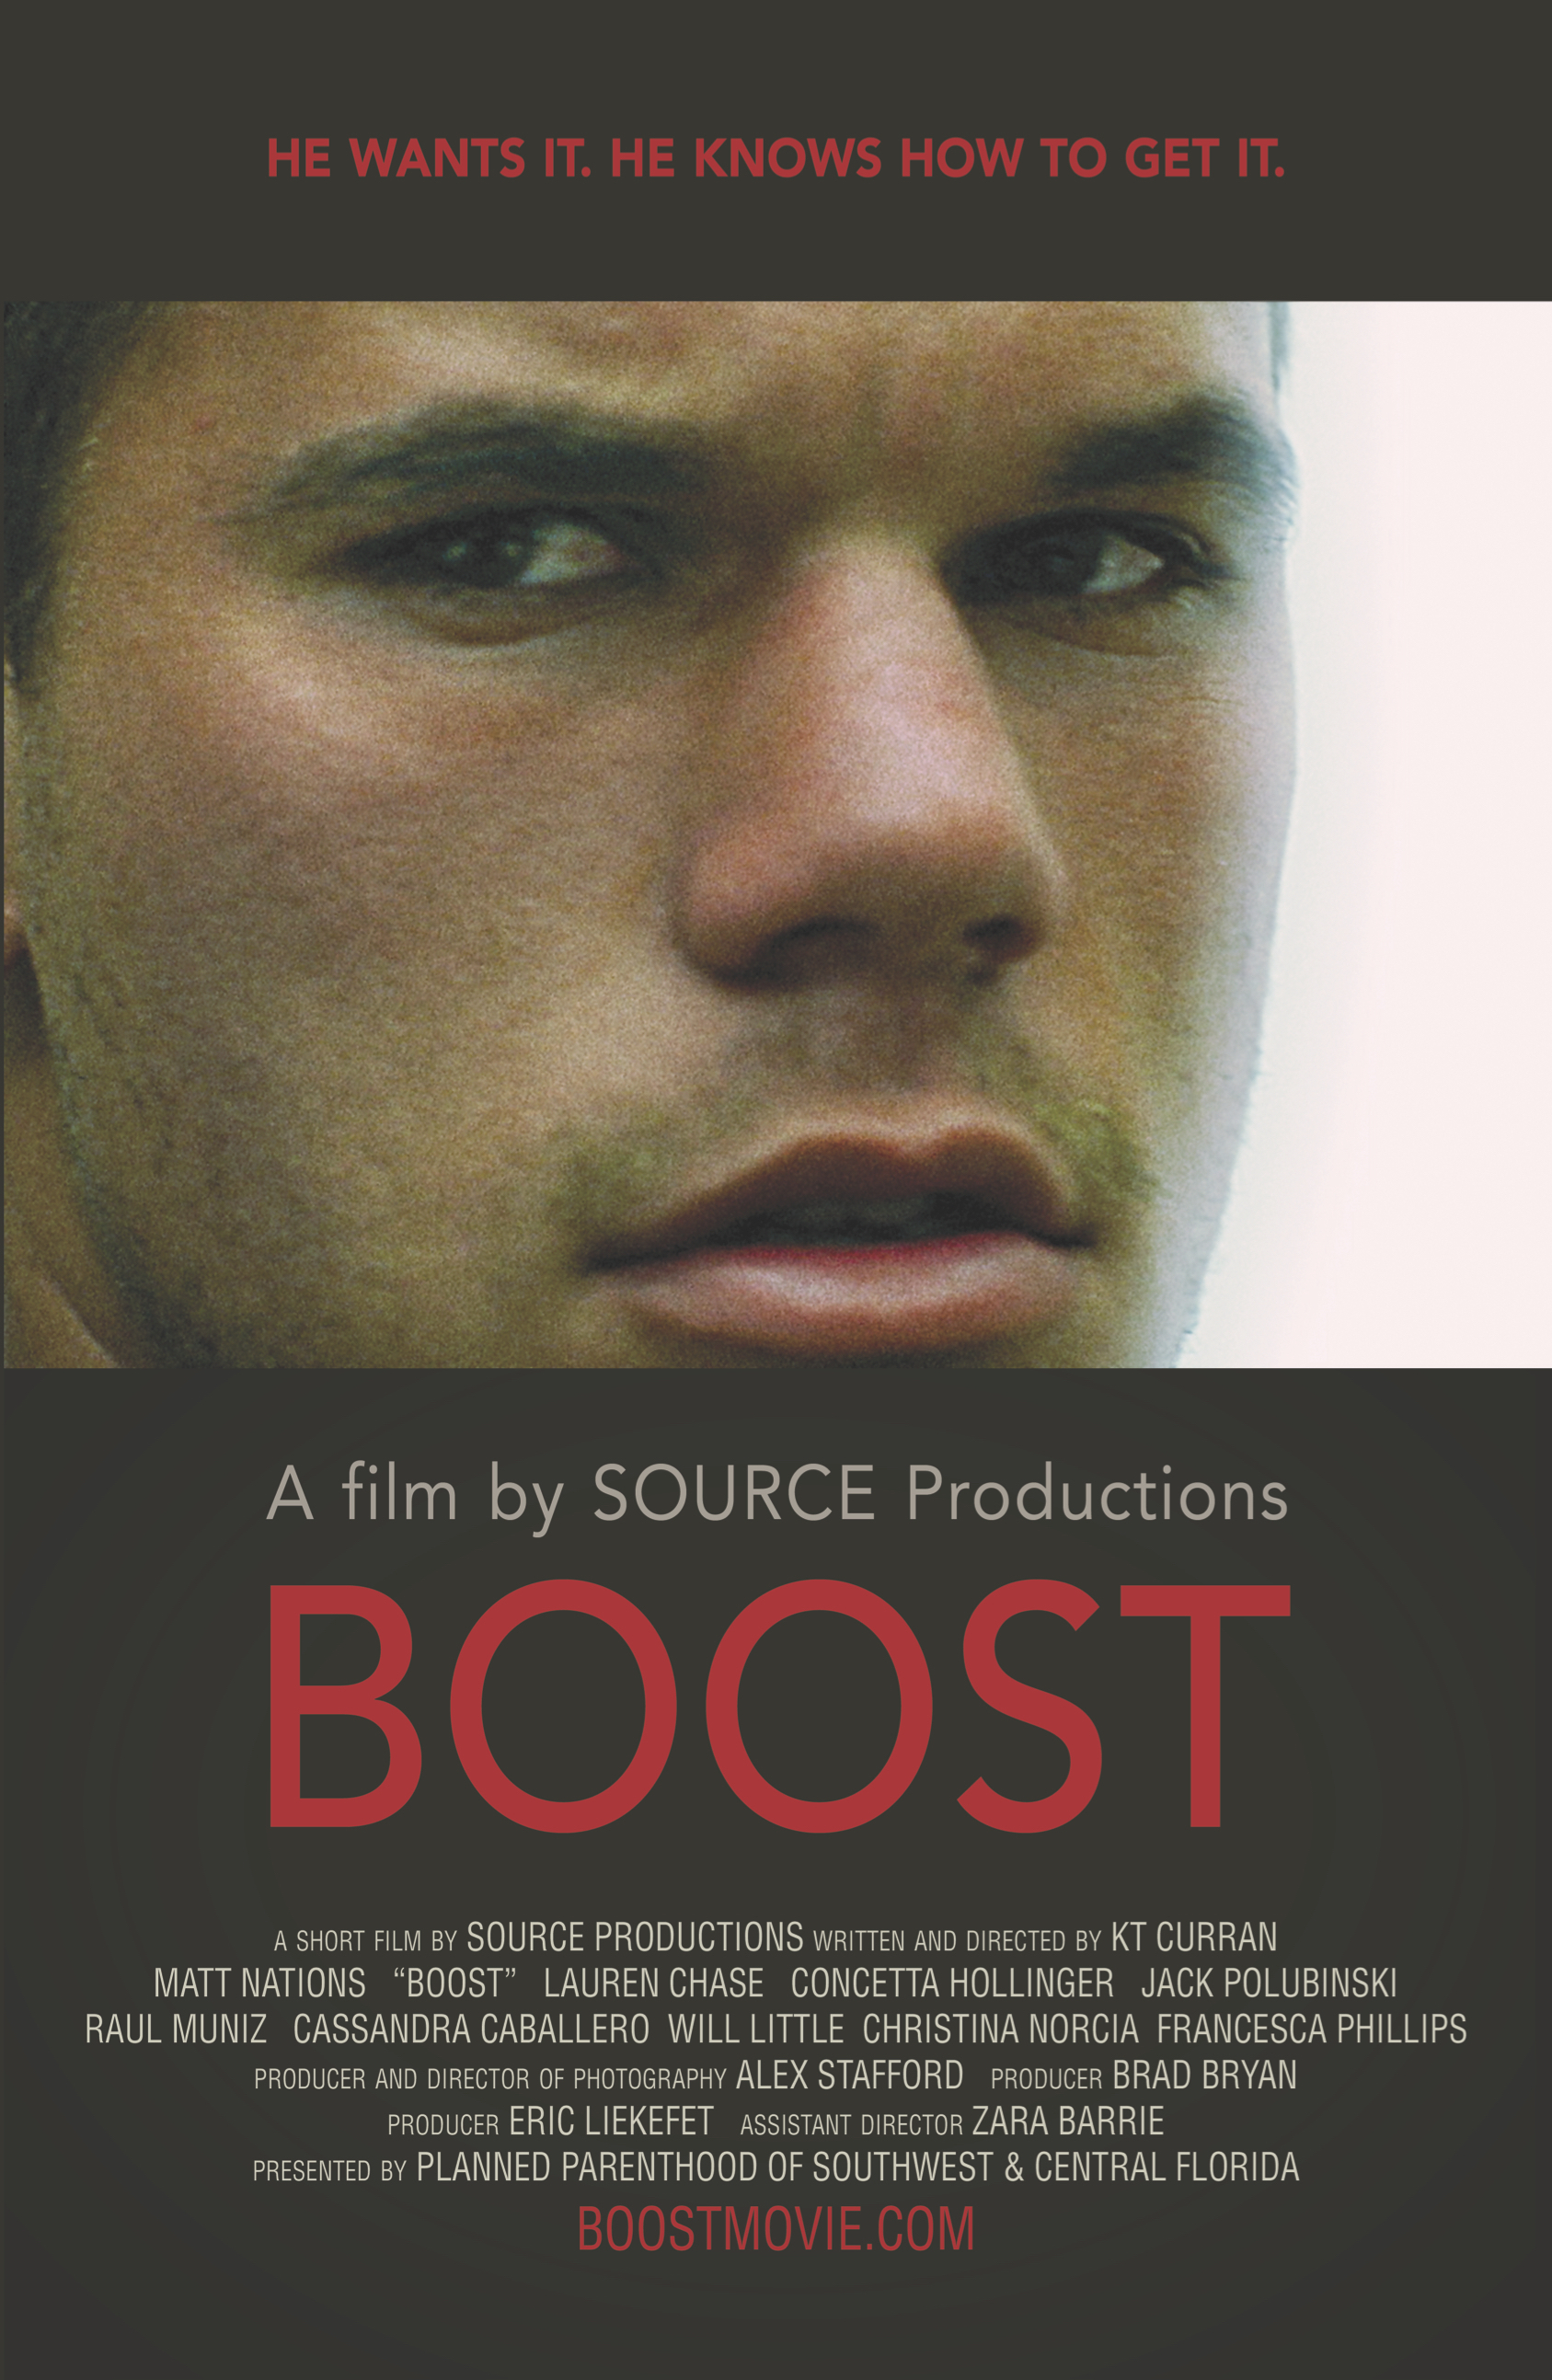 Matt Nations in BOOST, Written and Directed by KT curran